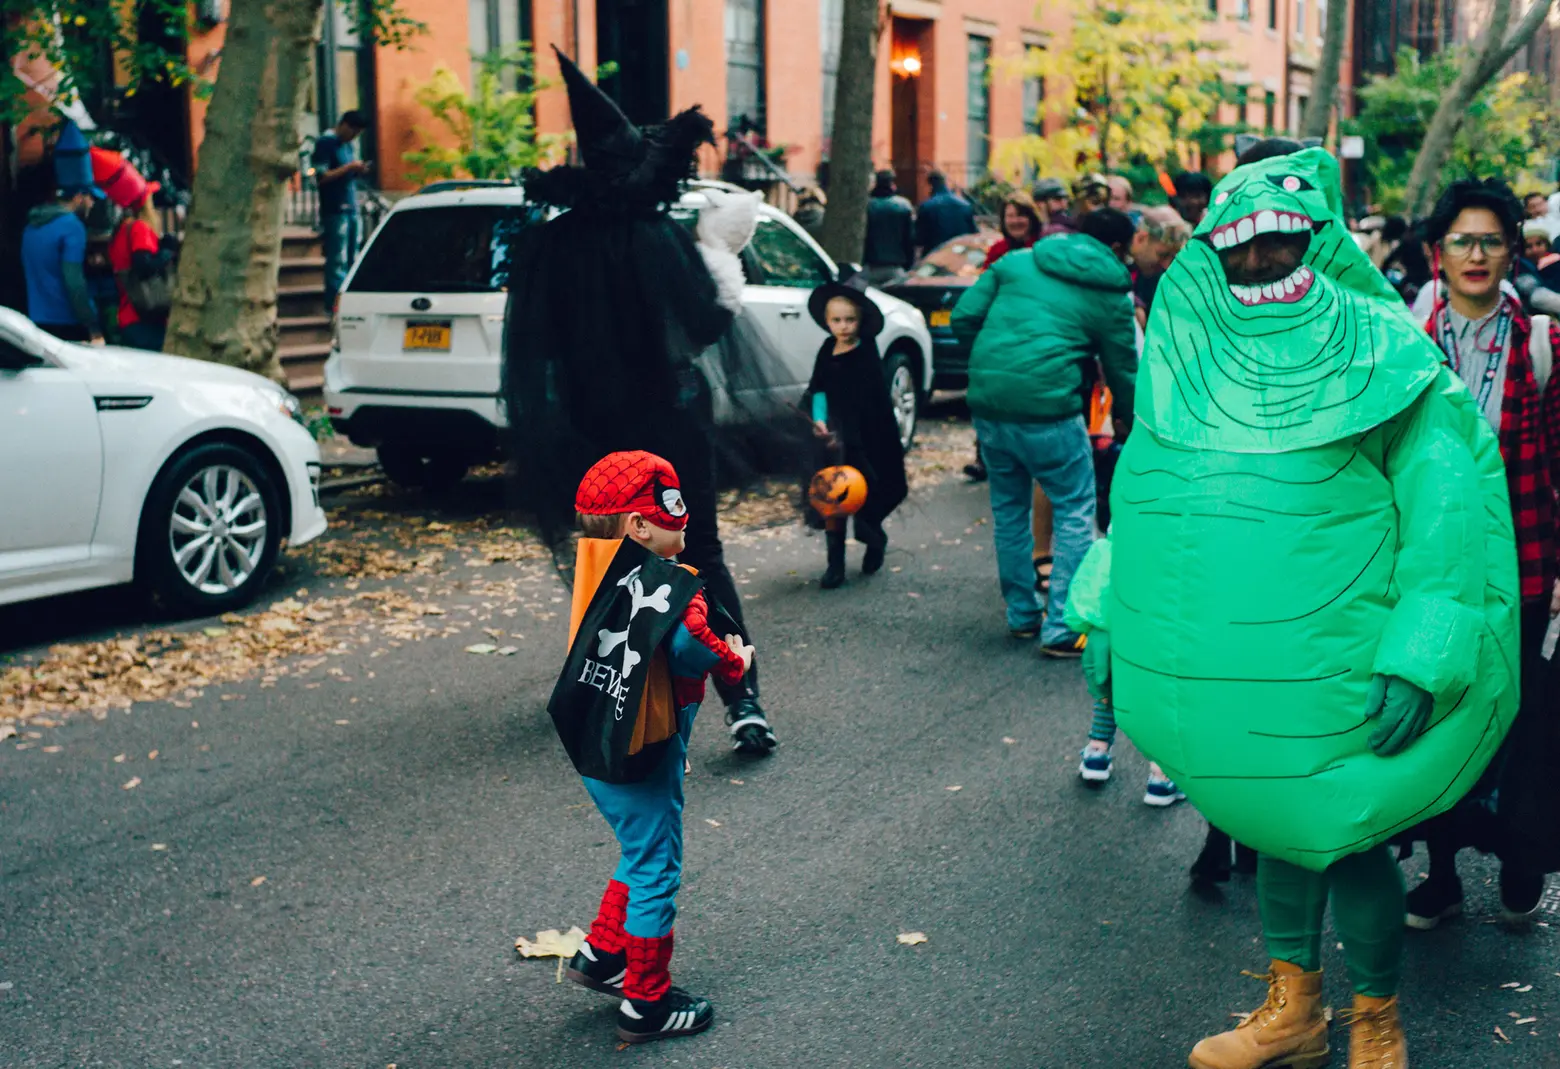 Nearly 100 NYC streets will go car-free for safe trick-or-treating this Halloween